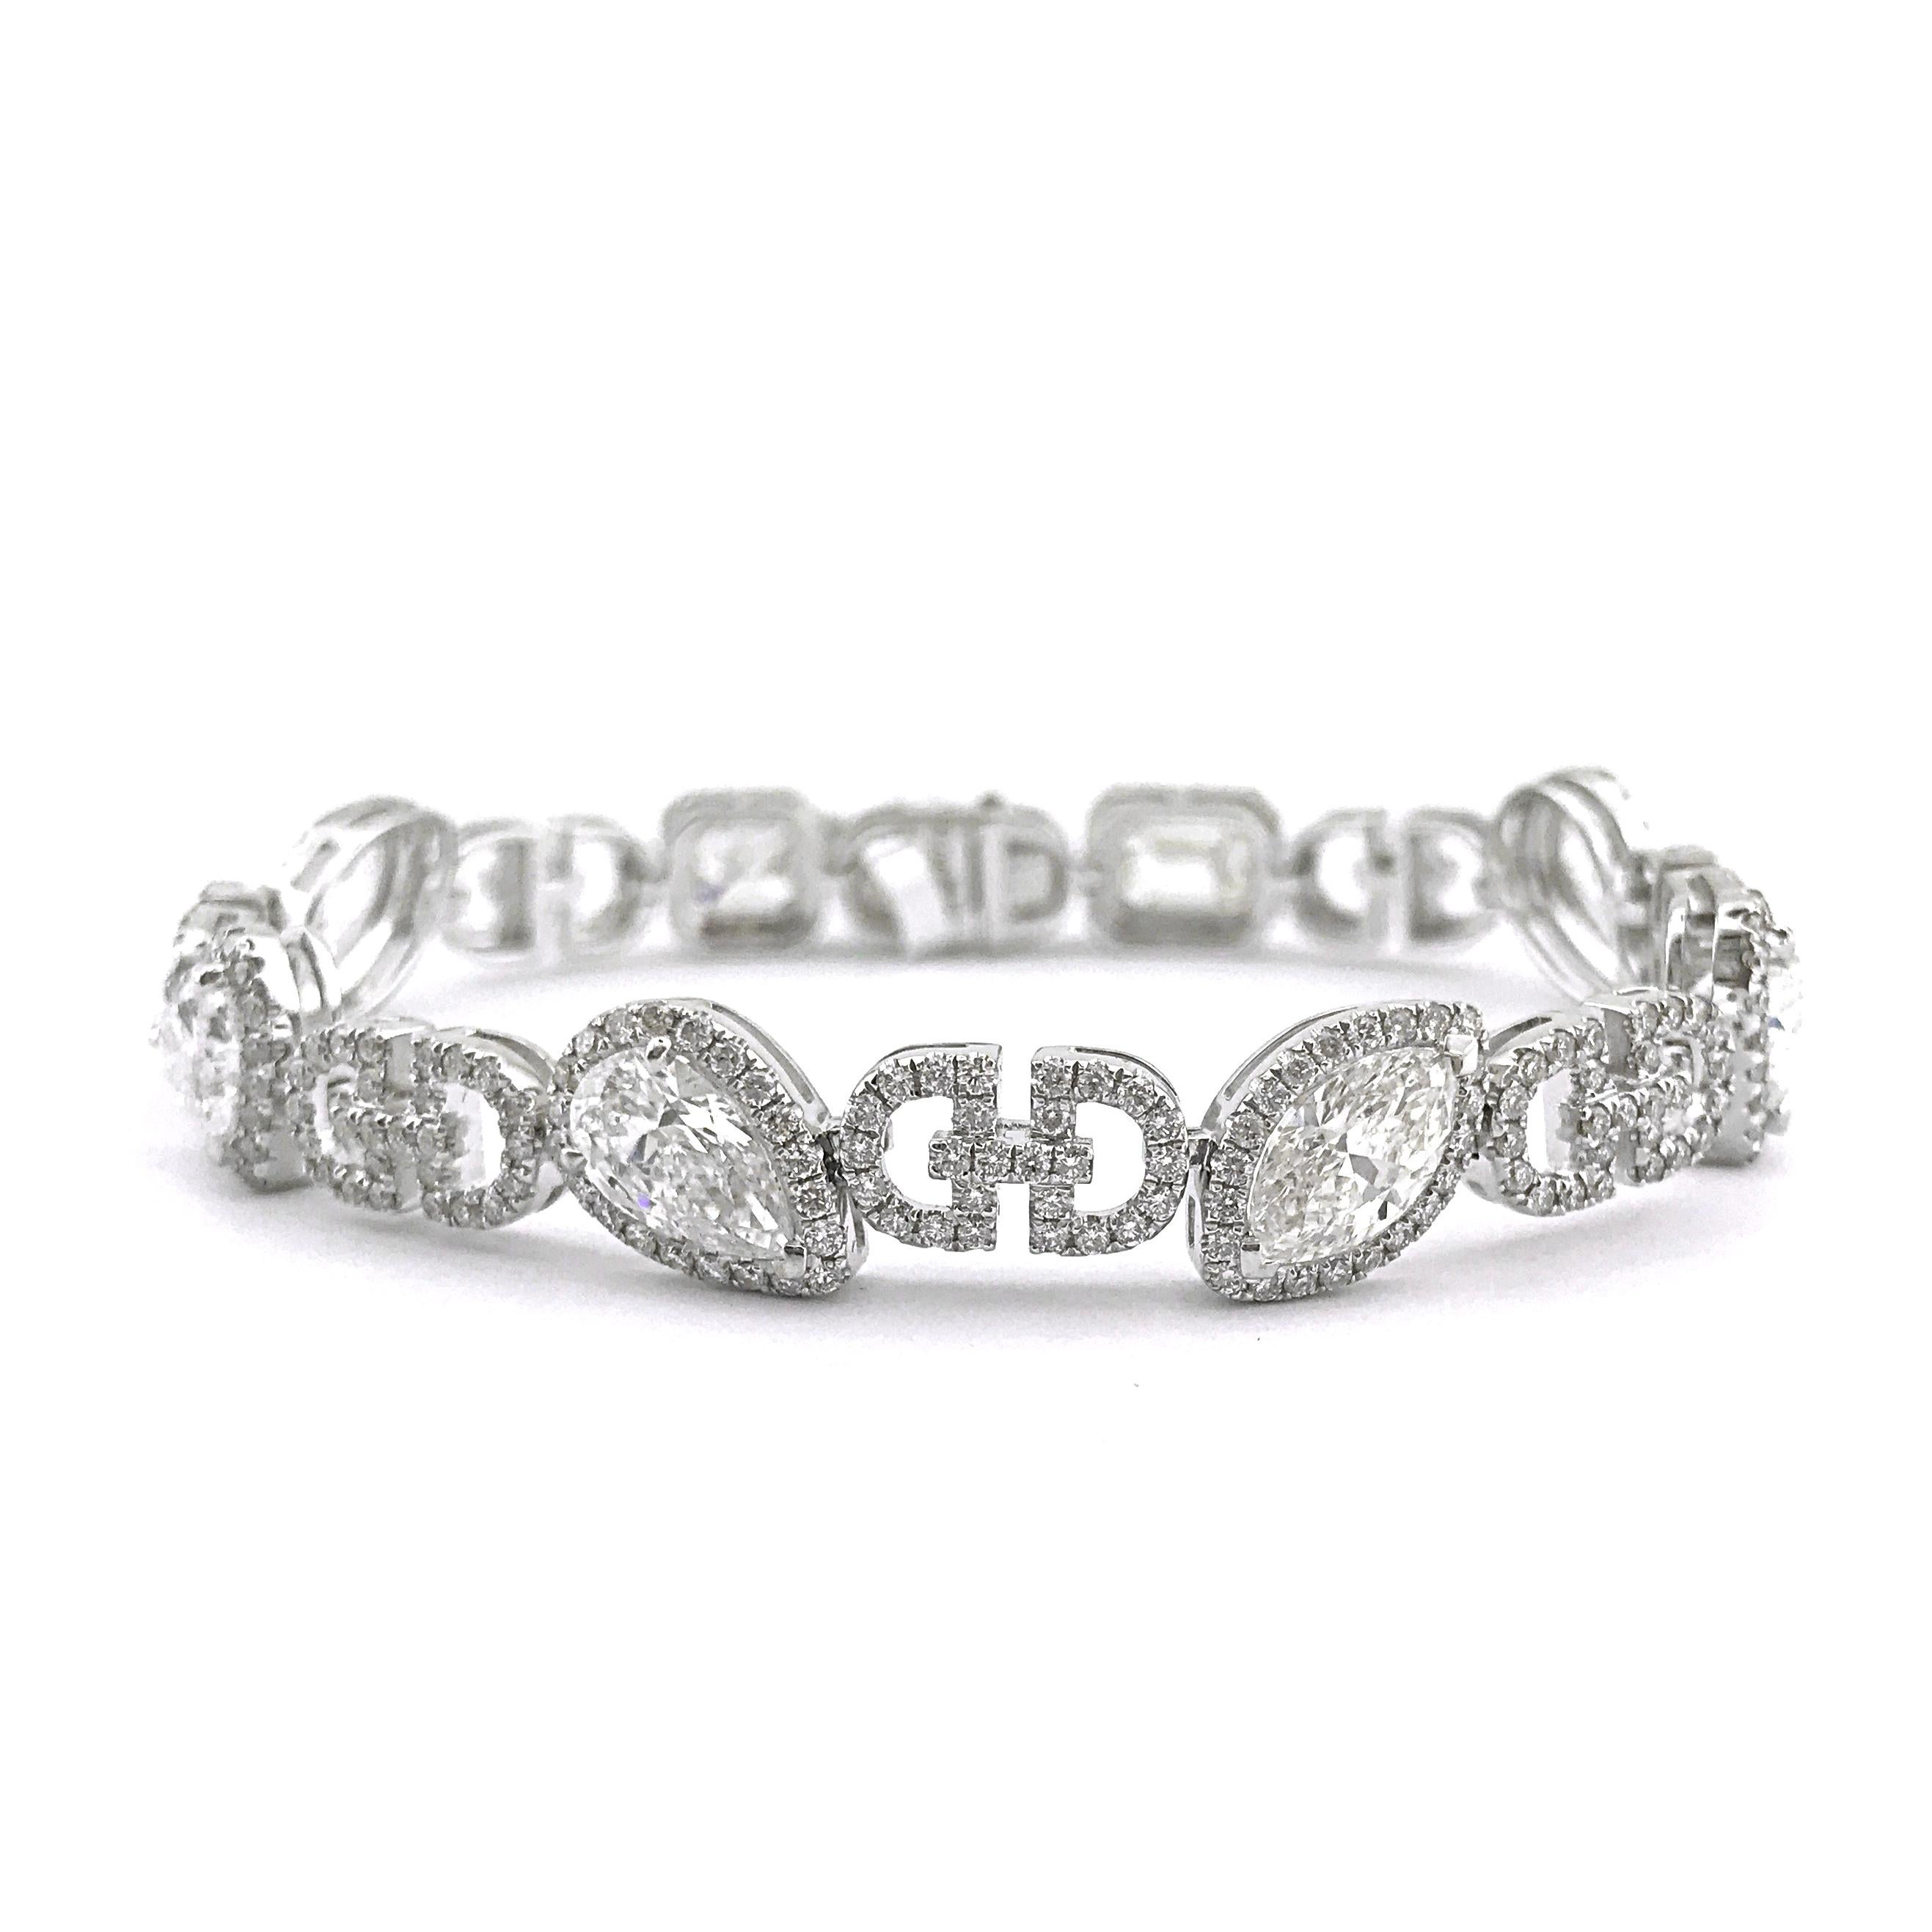 MIXED CUT DIAMOND BRACELET - 11.41 CT


Set in 18Kt white gold


Total diamond weight: 11.41 ct
[ 397 diamonds ]
Color: E-H
Clarity: VS-SI2

Total bracelet weight: 18.54 grams


All 8 diamonds are certified


GIA Certified